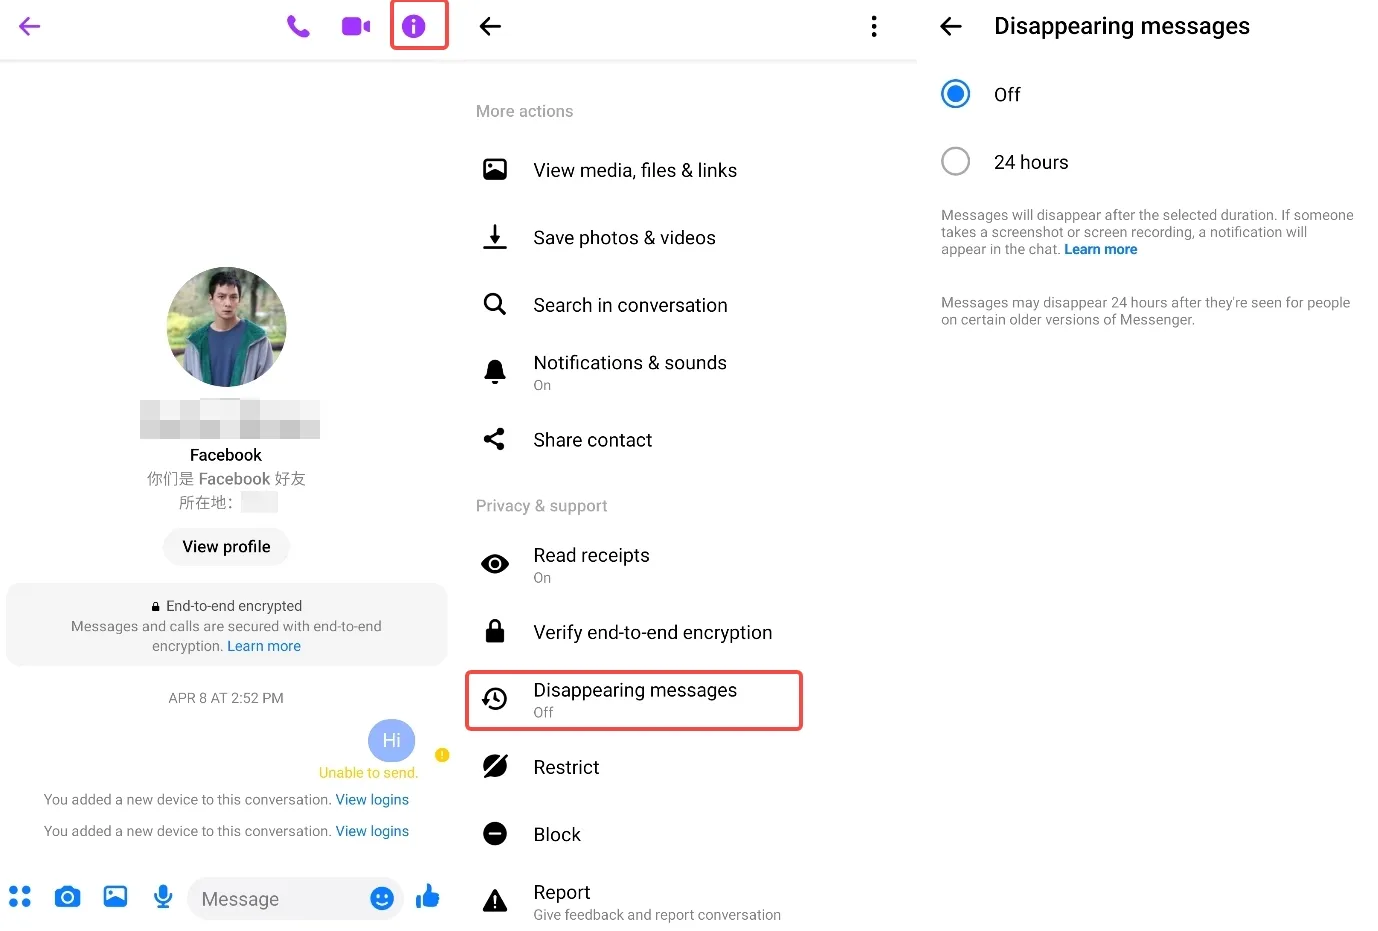 Facebook Messenger disappearing messages